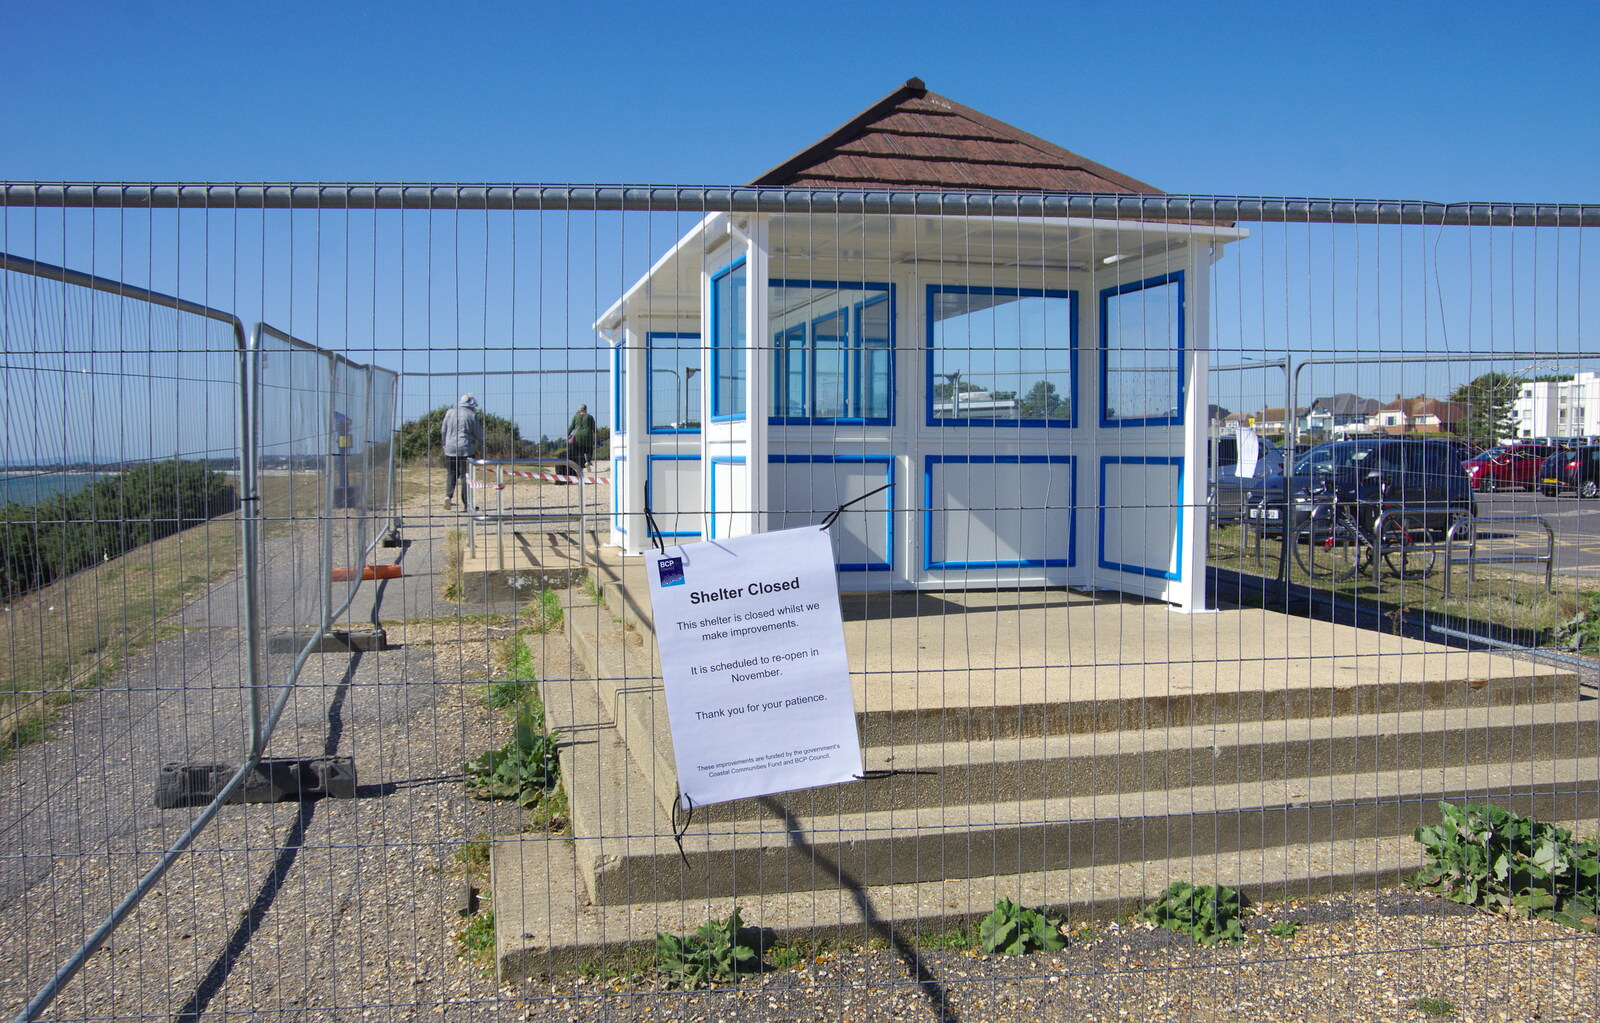 The shelter will be finished by winter from A Trip to the South Coast, Highcliffe, Dorset - 20th September 2019